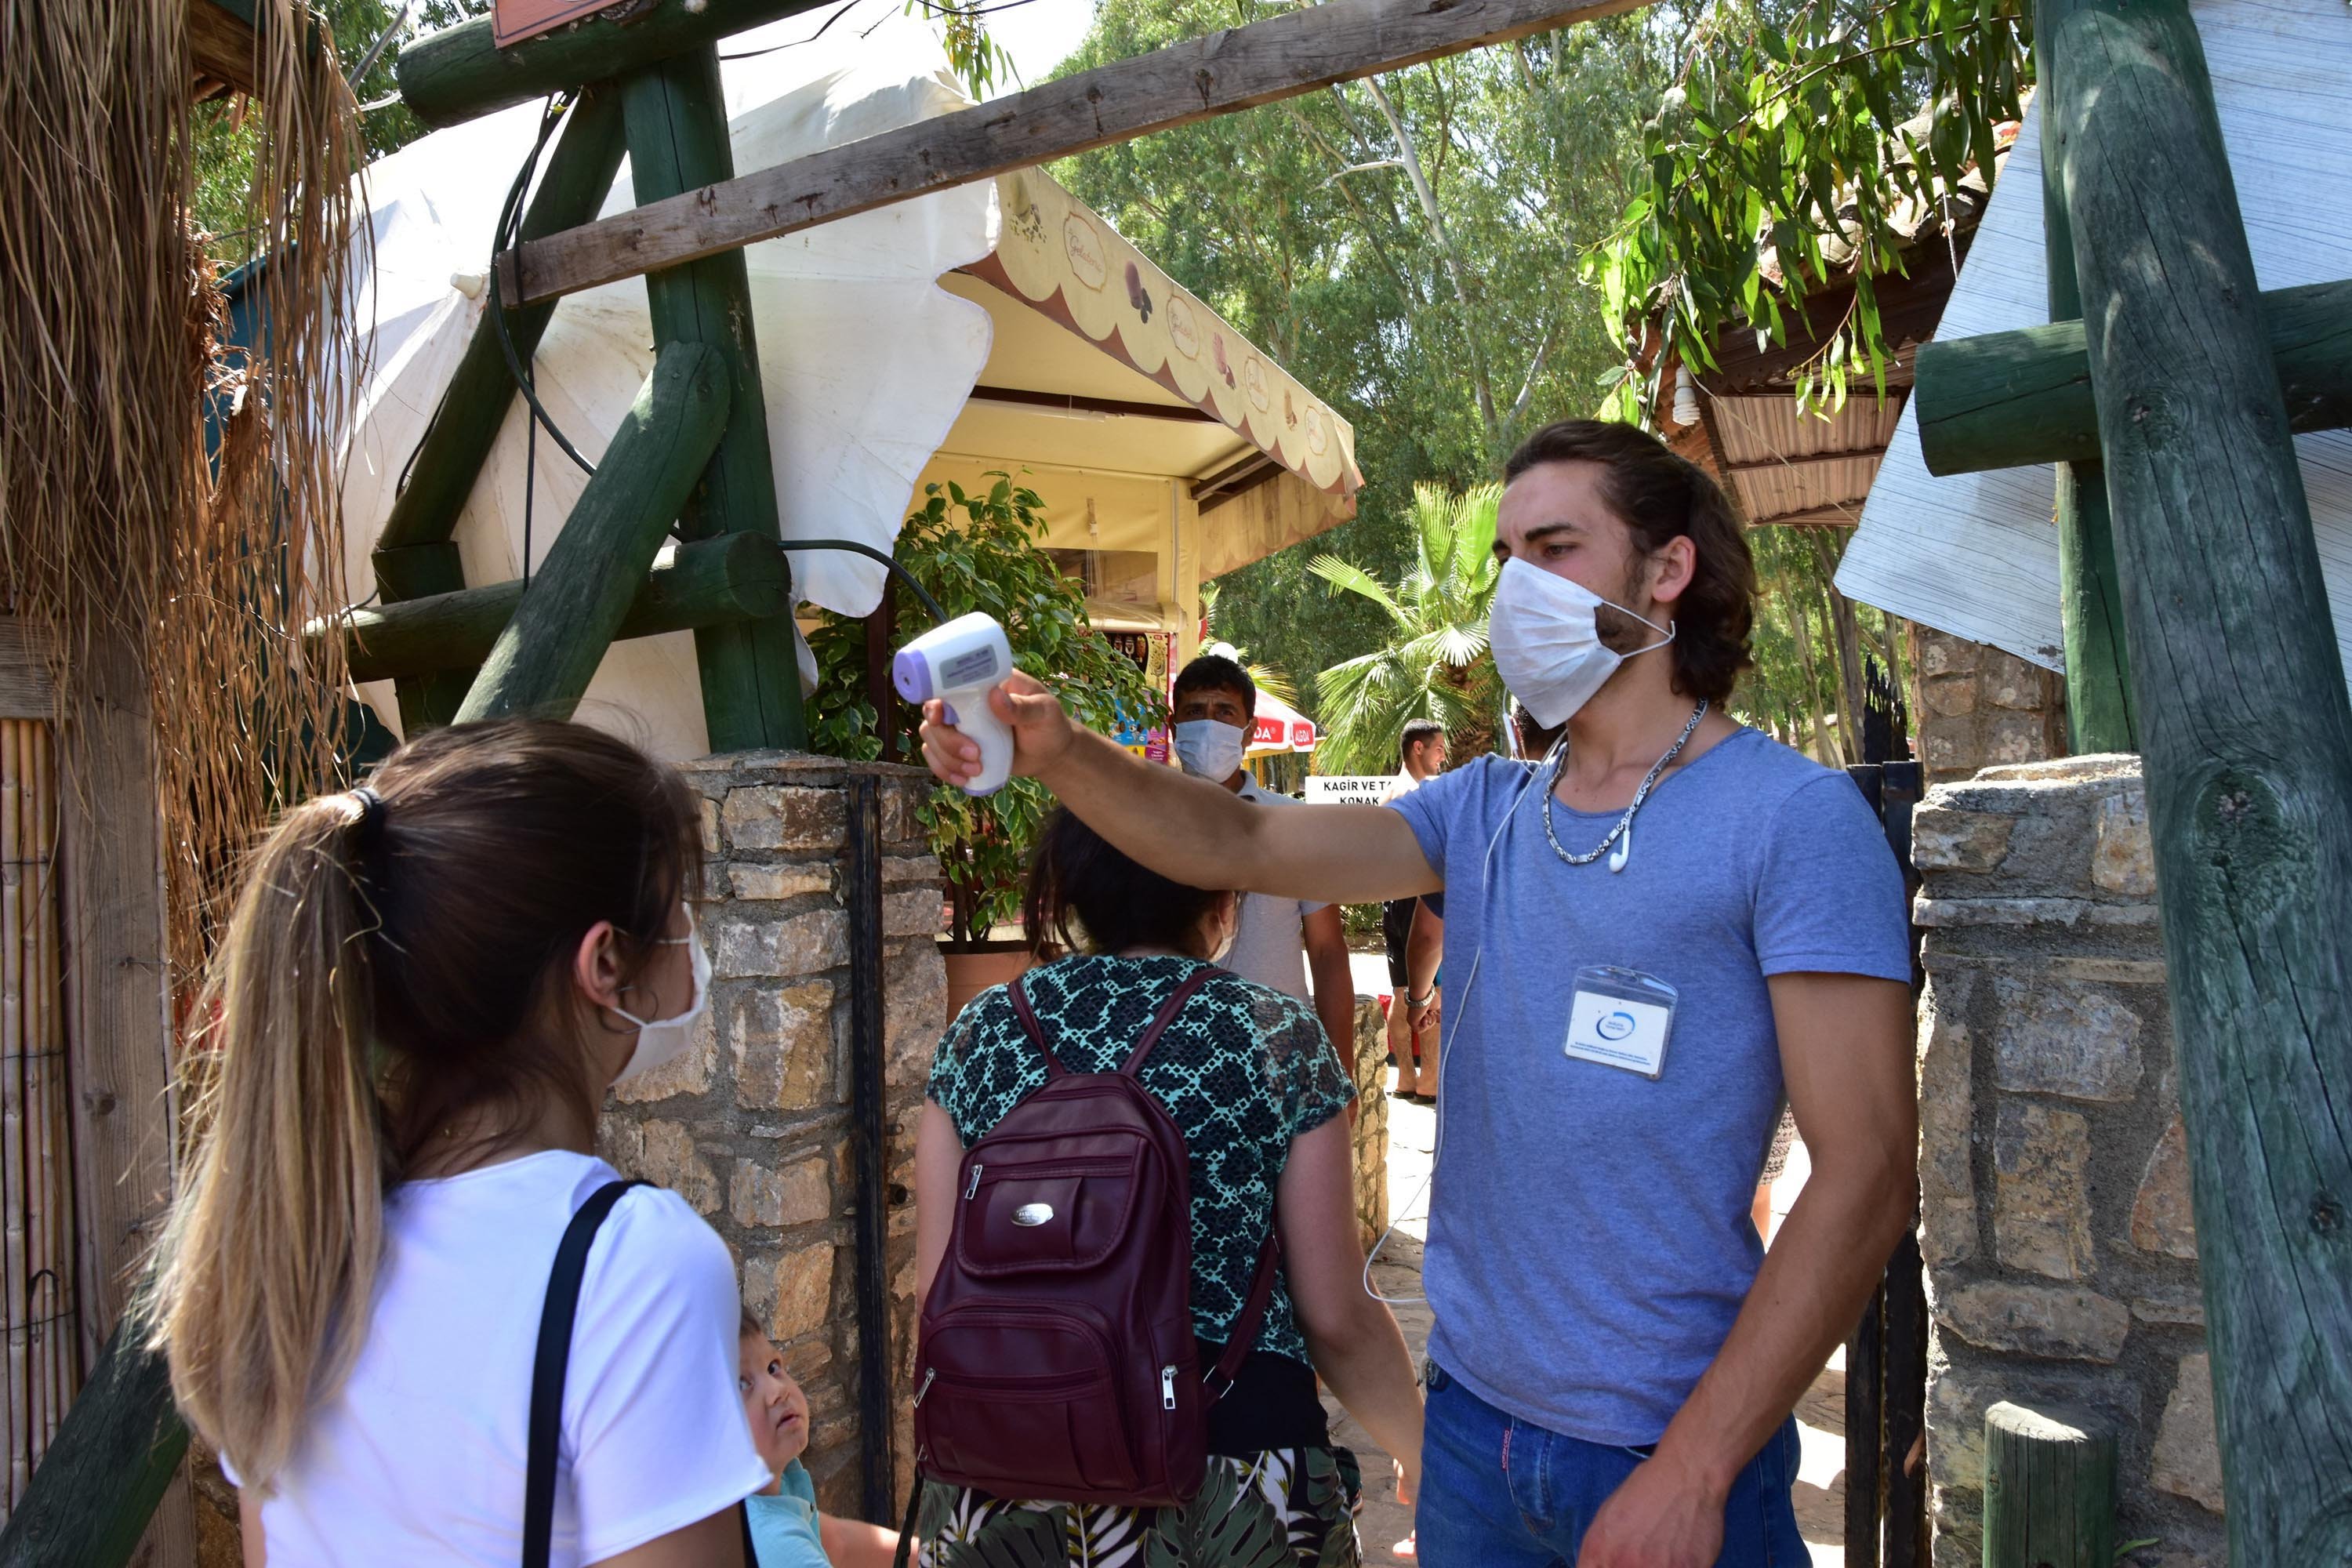 Campsites in Muğla are making sure all visitors wear masks upon entrance and are checking guests